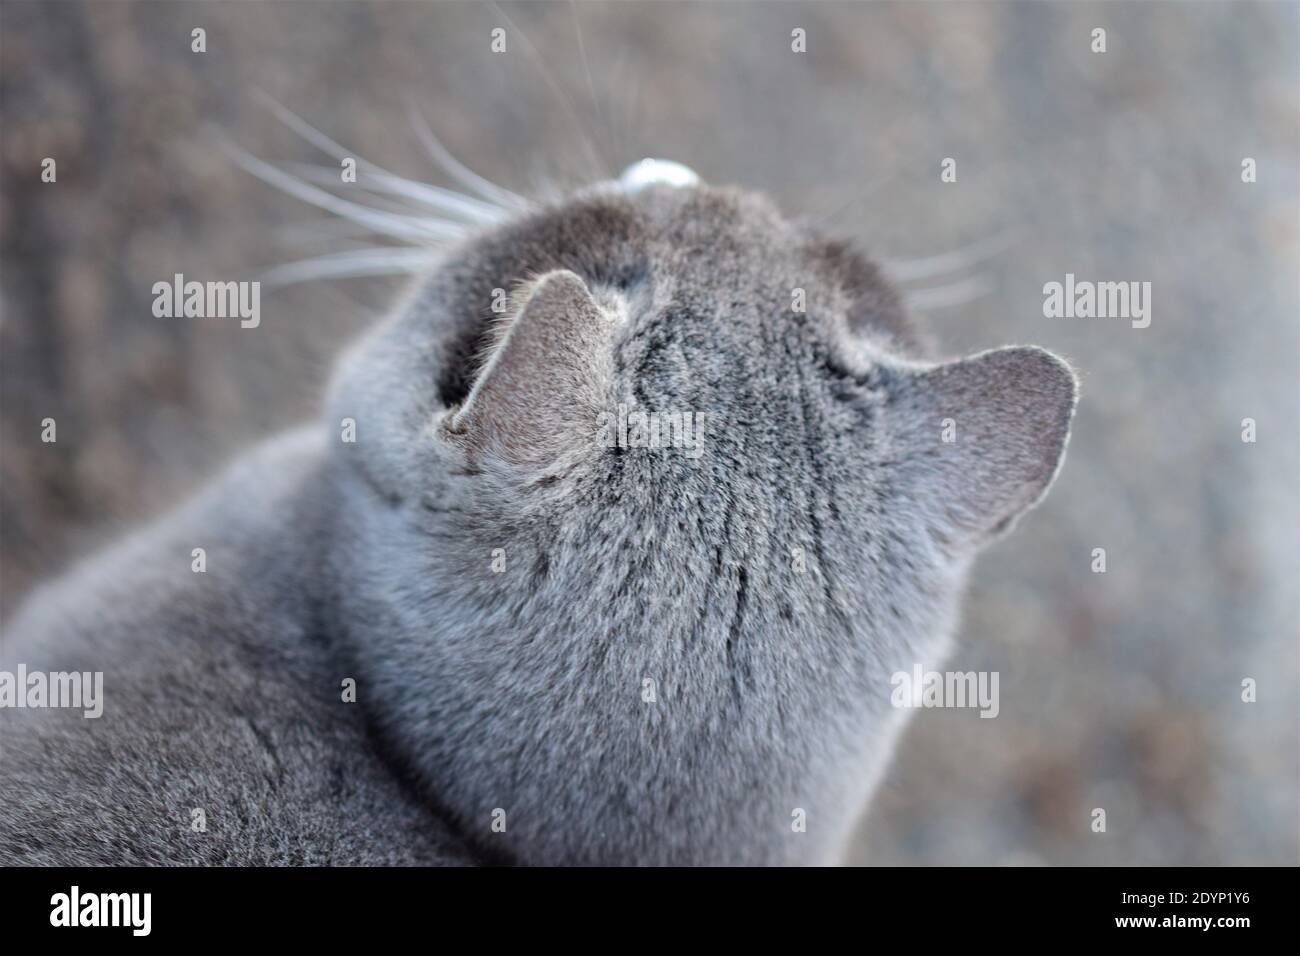 Top view of the head of a grey head against a grey background Stock Photo